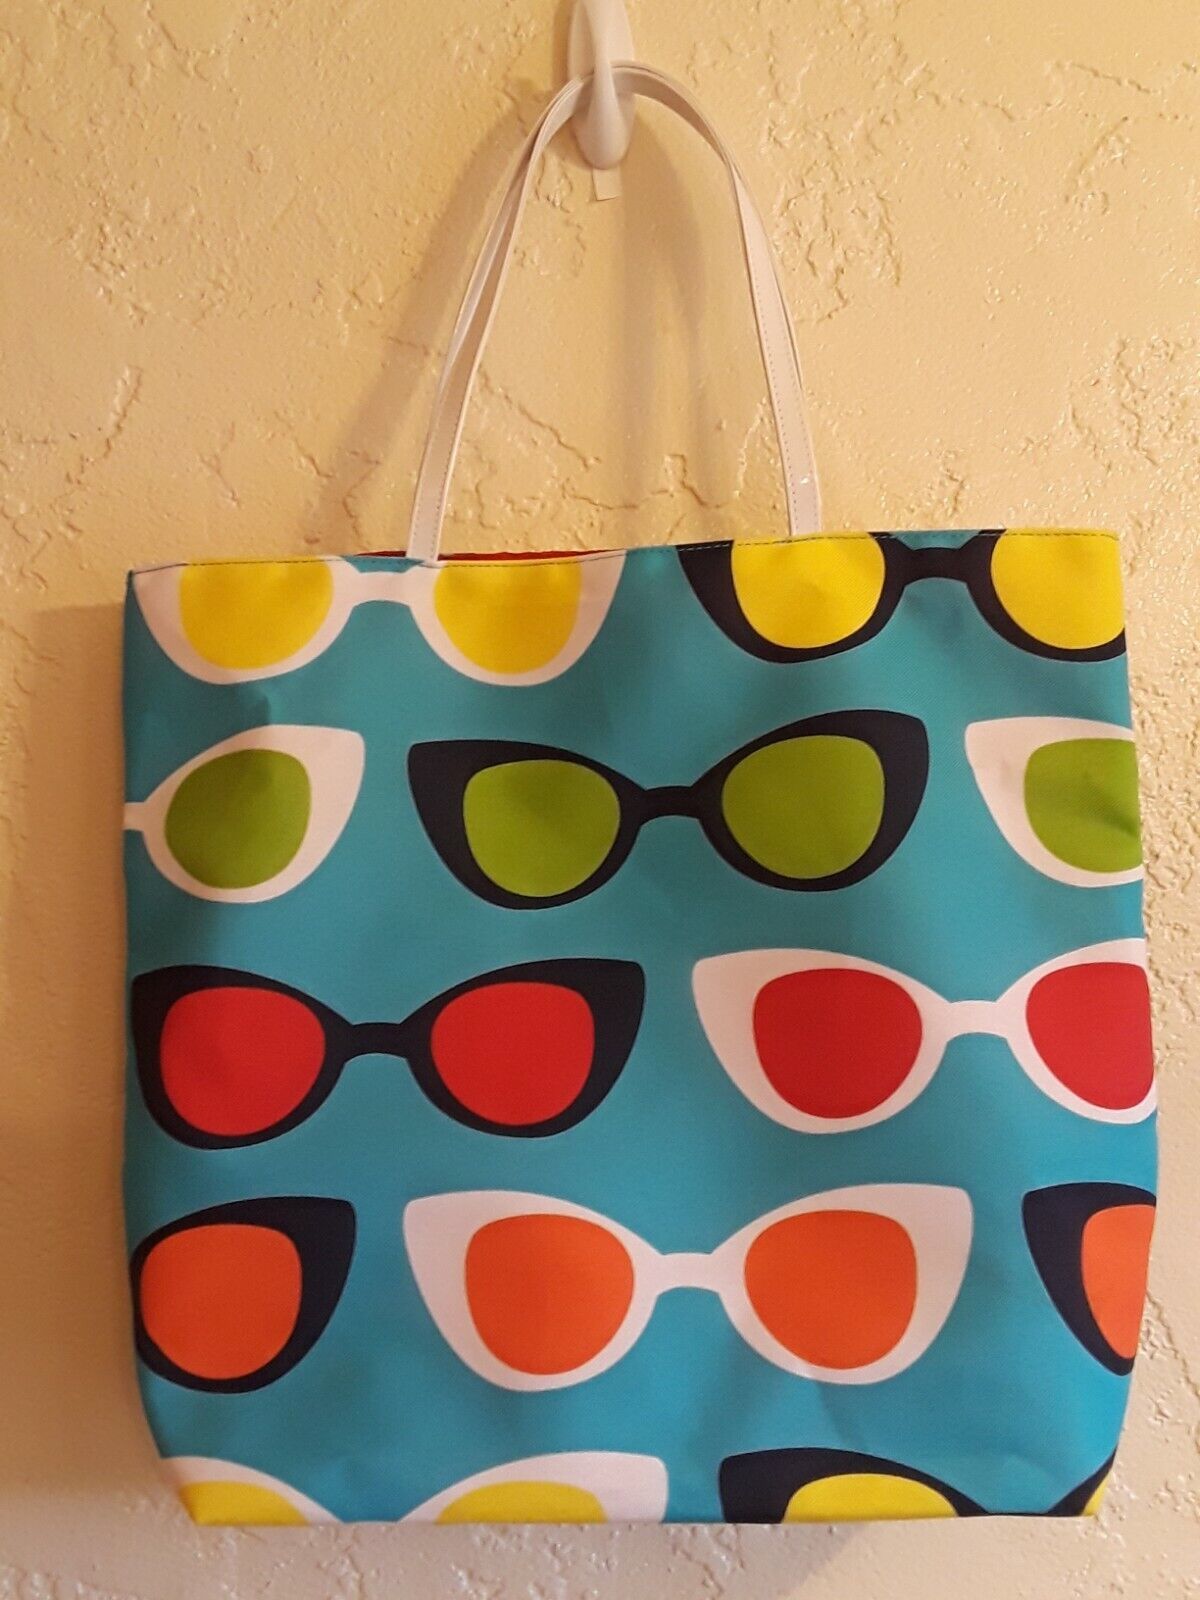 Primary image for Lisa Perry For Estee Lauder Large Tote Bag Purse Sunglasses Graphic